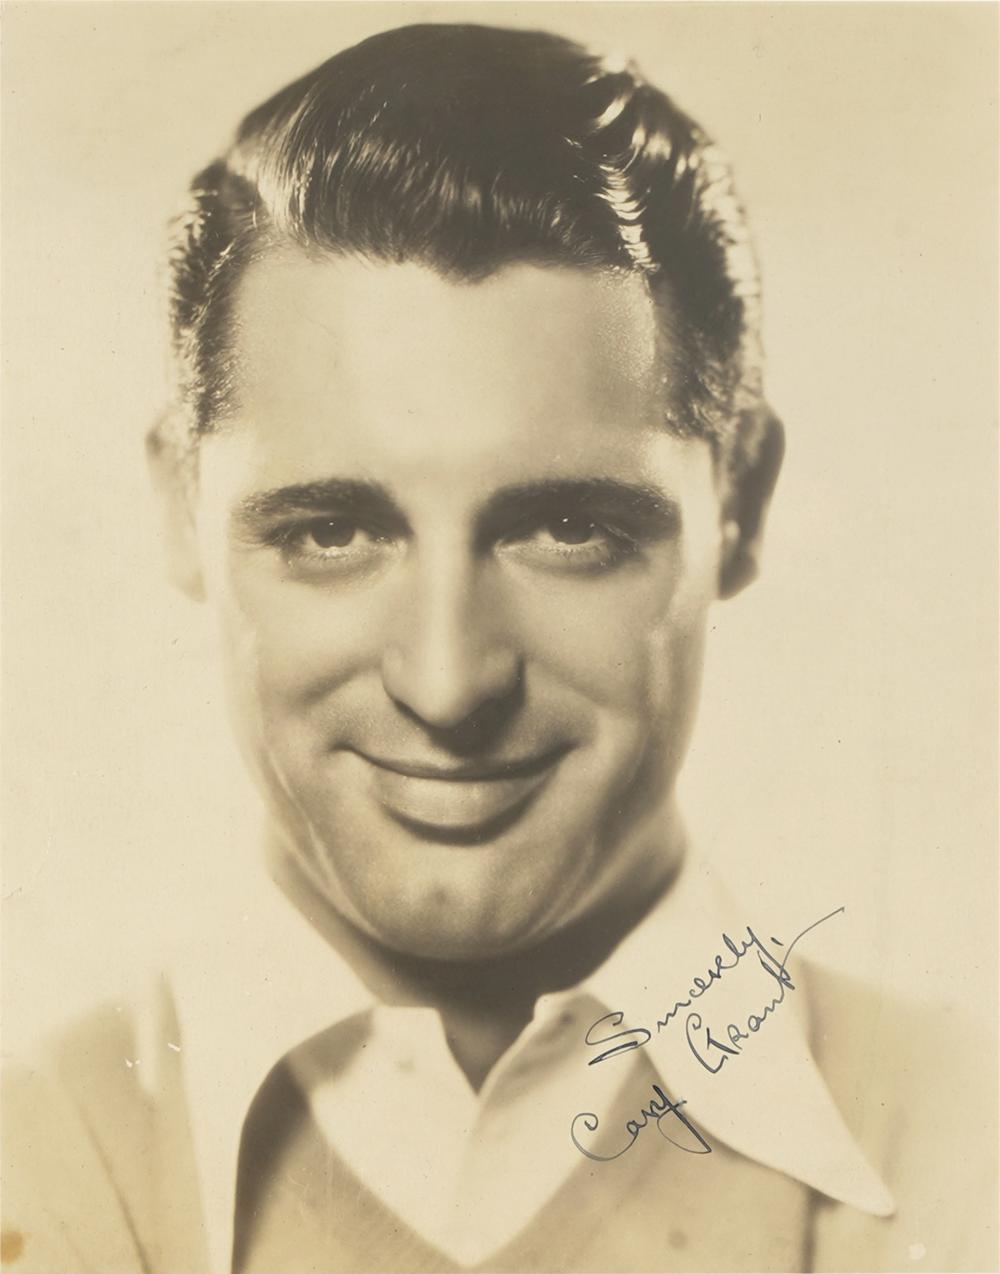 PHOTO OF CARY GRANTmatted and framed 32d67e